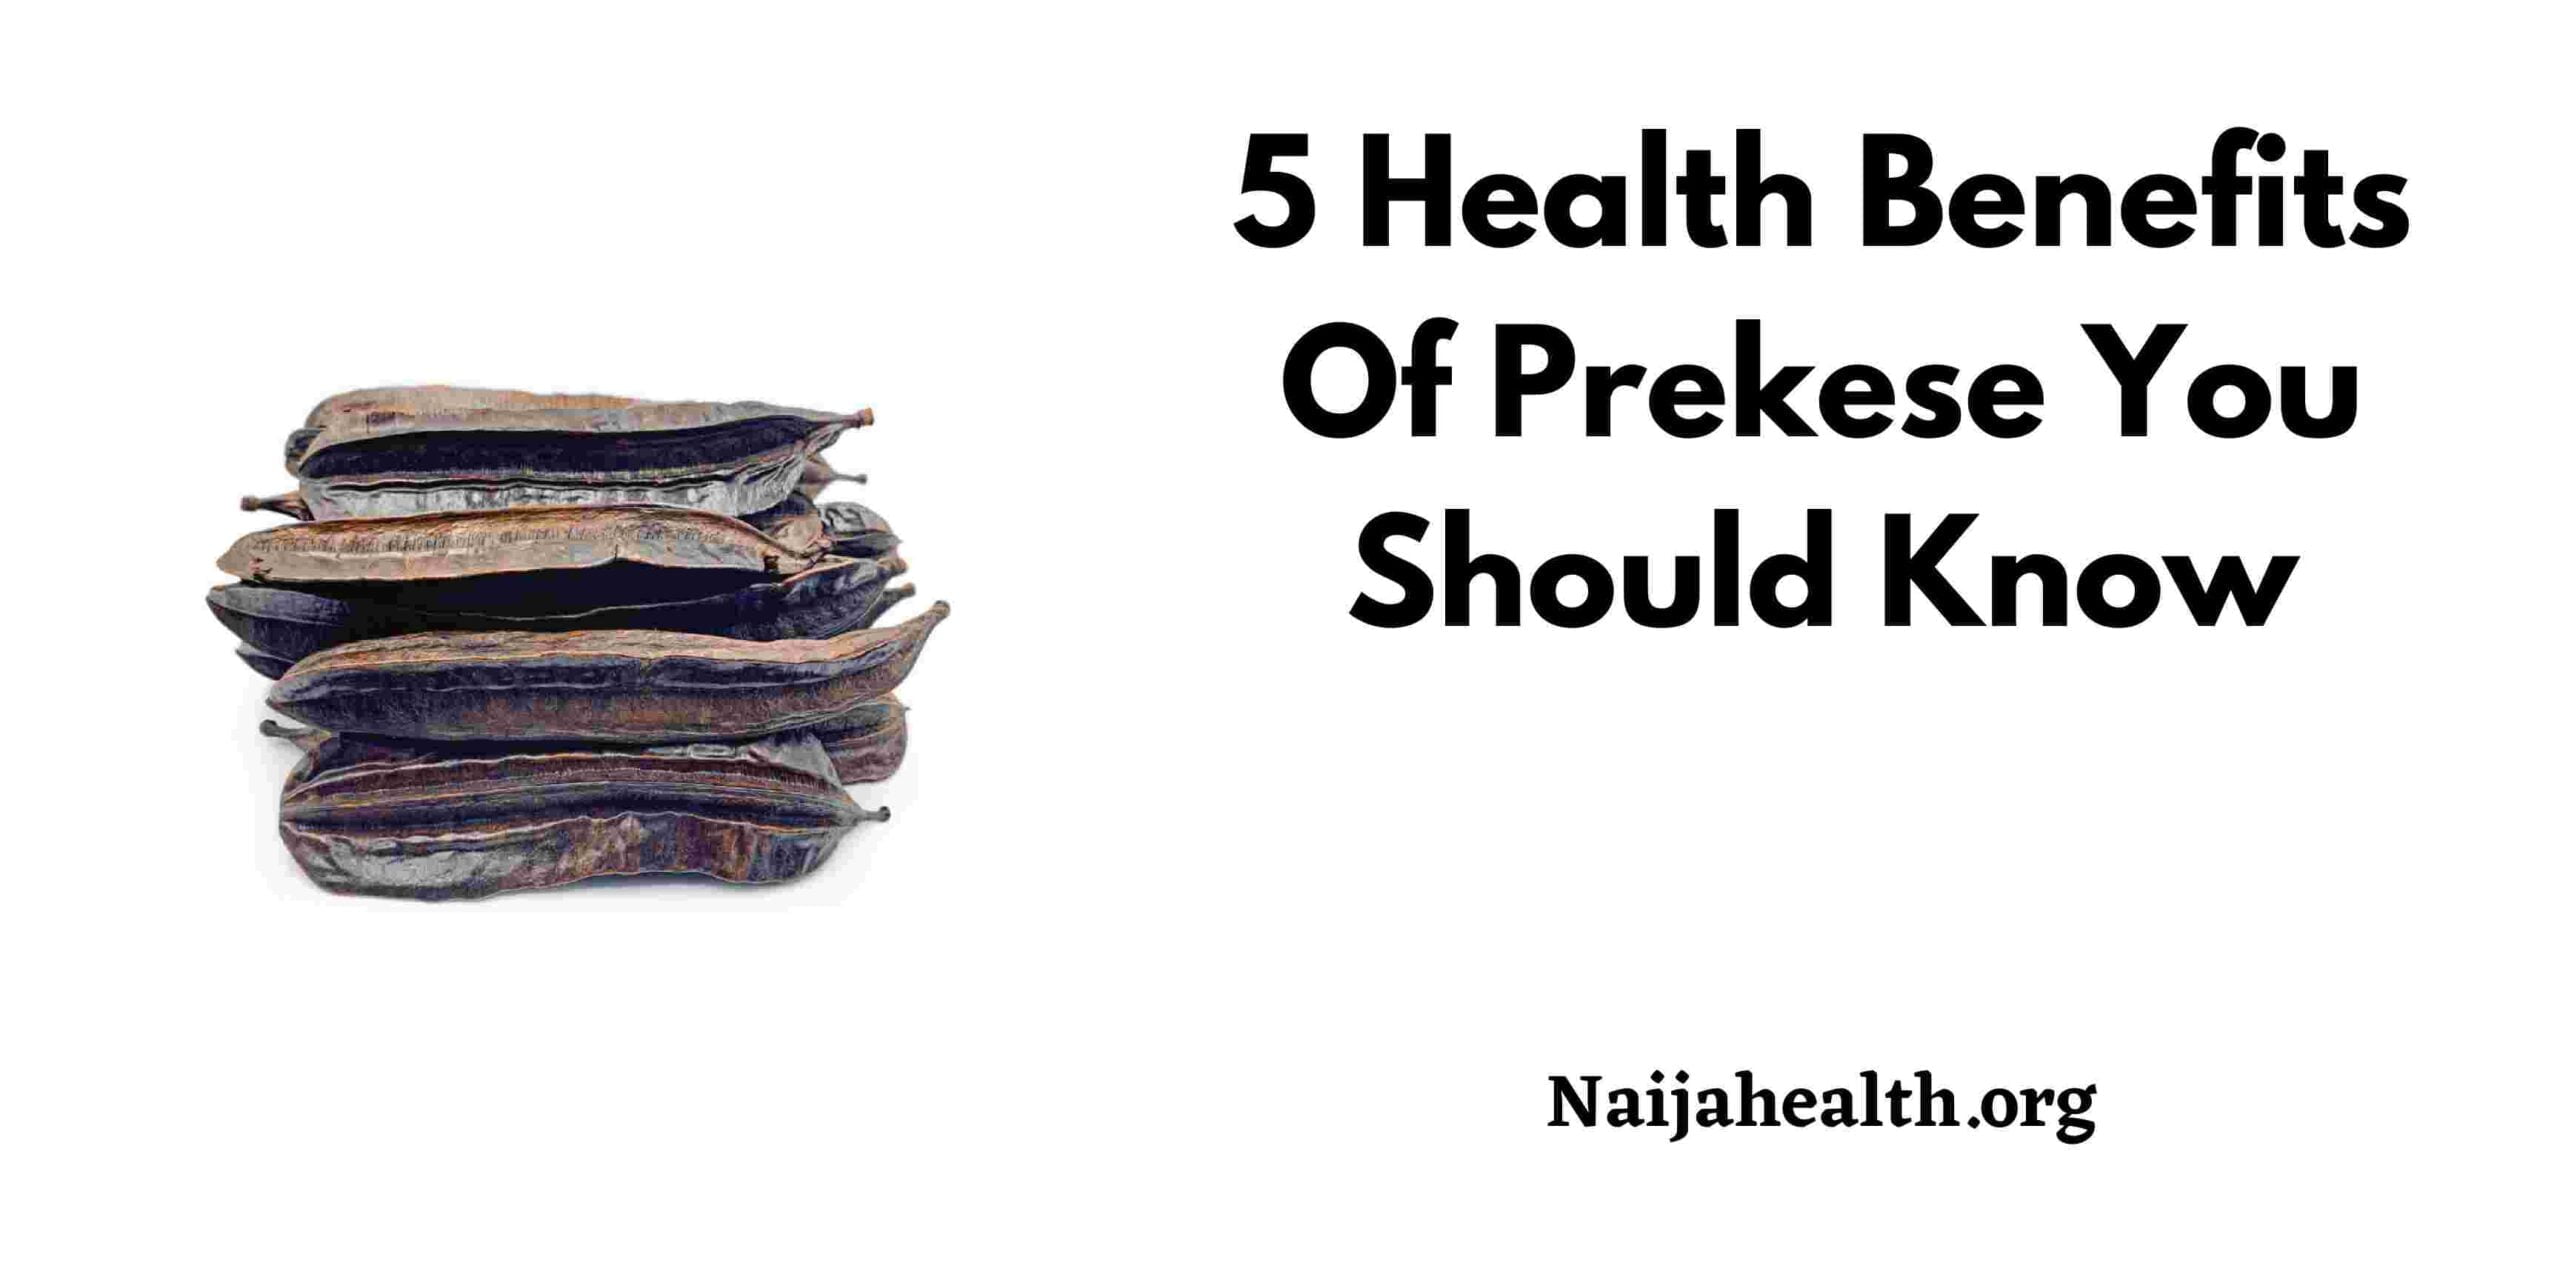 5 Health Benefits Of Prekese You Should Know